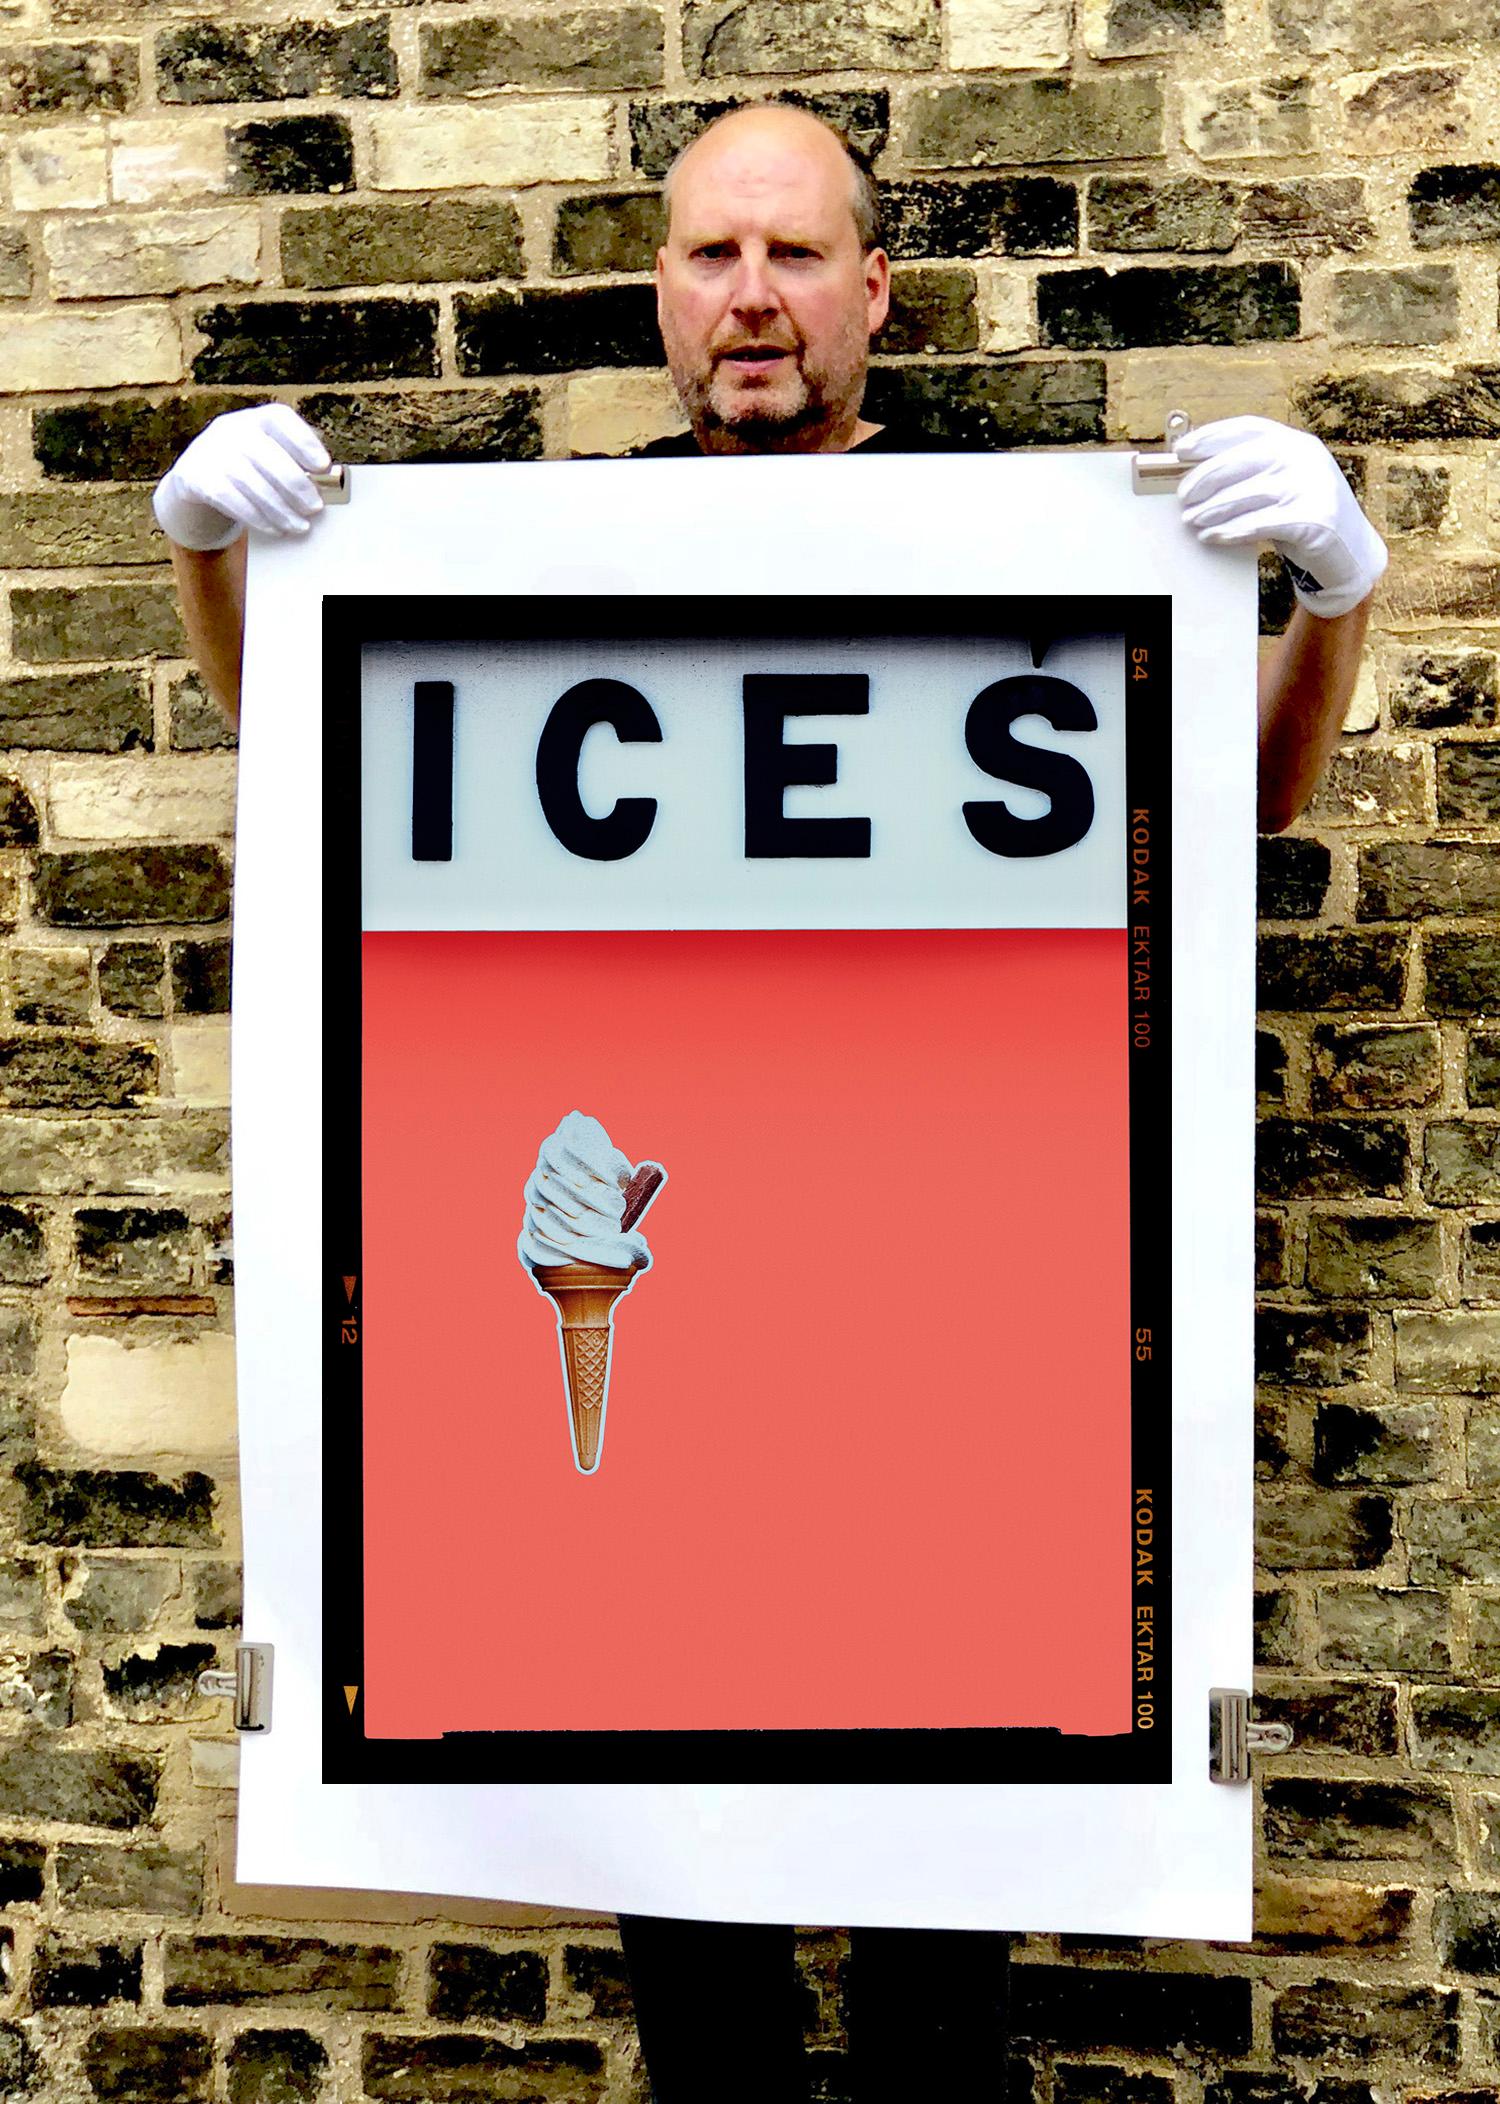 Ices (Melondrama), Bexhill-on-Sea - British seaside color photography - Print by Richard Heeps